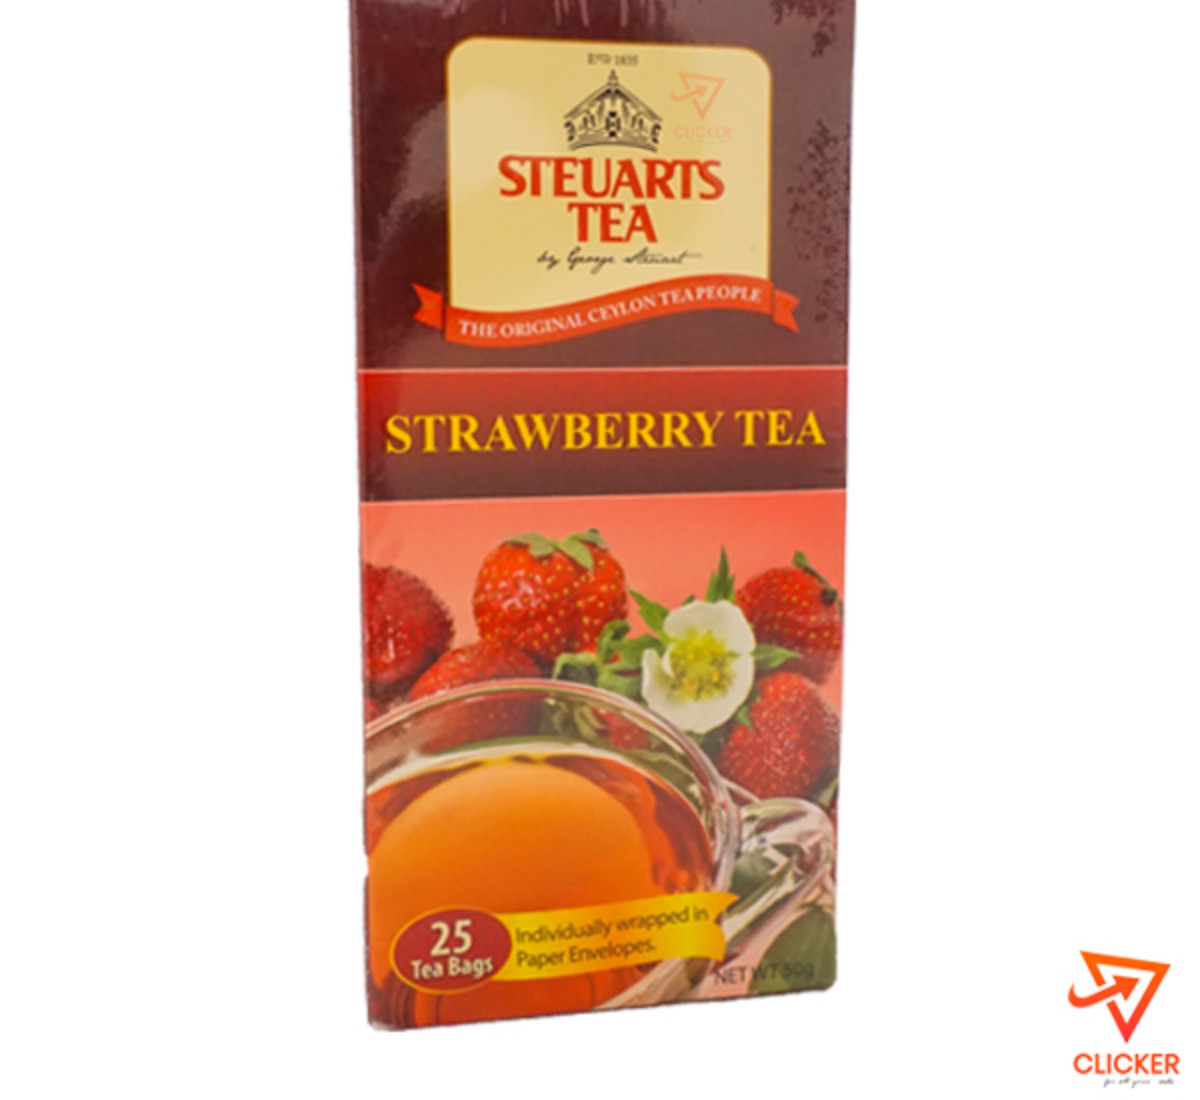 Clicker product 50g GEORGE STEURARTS   strawberry tea (25 tea bags) 930